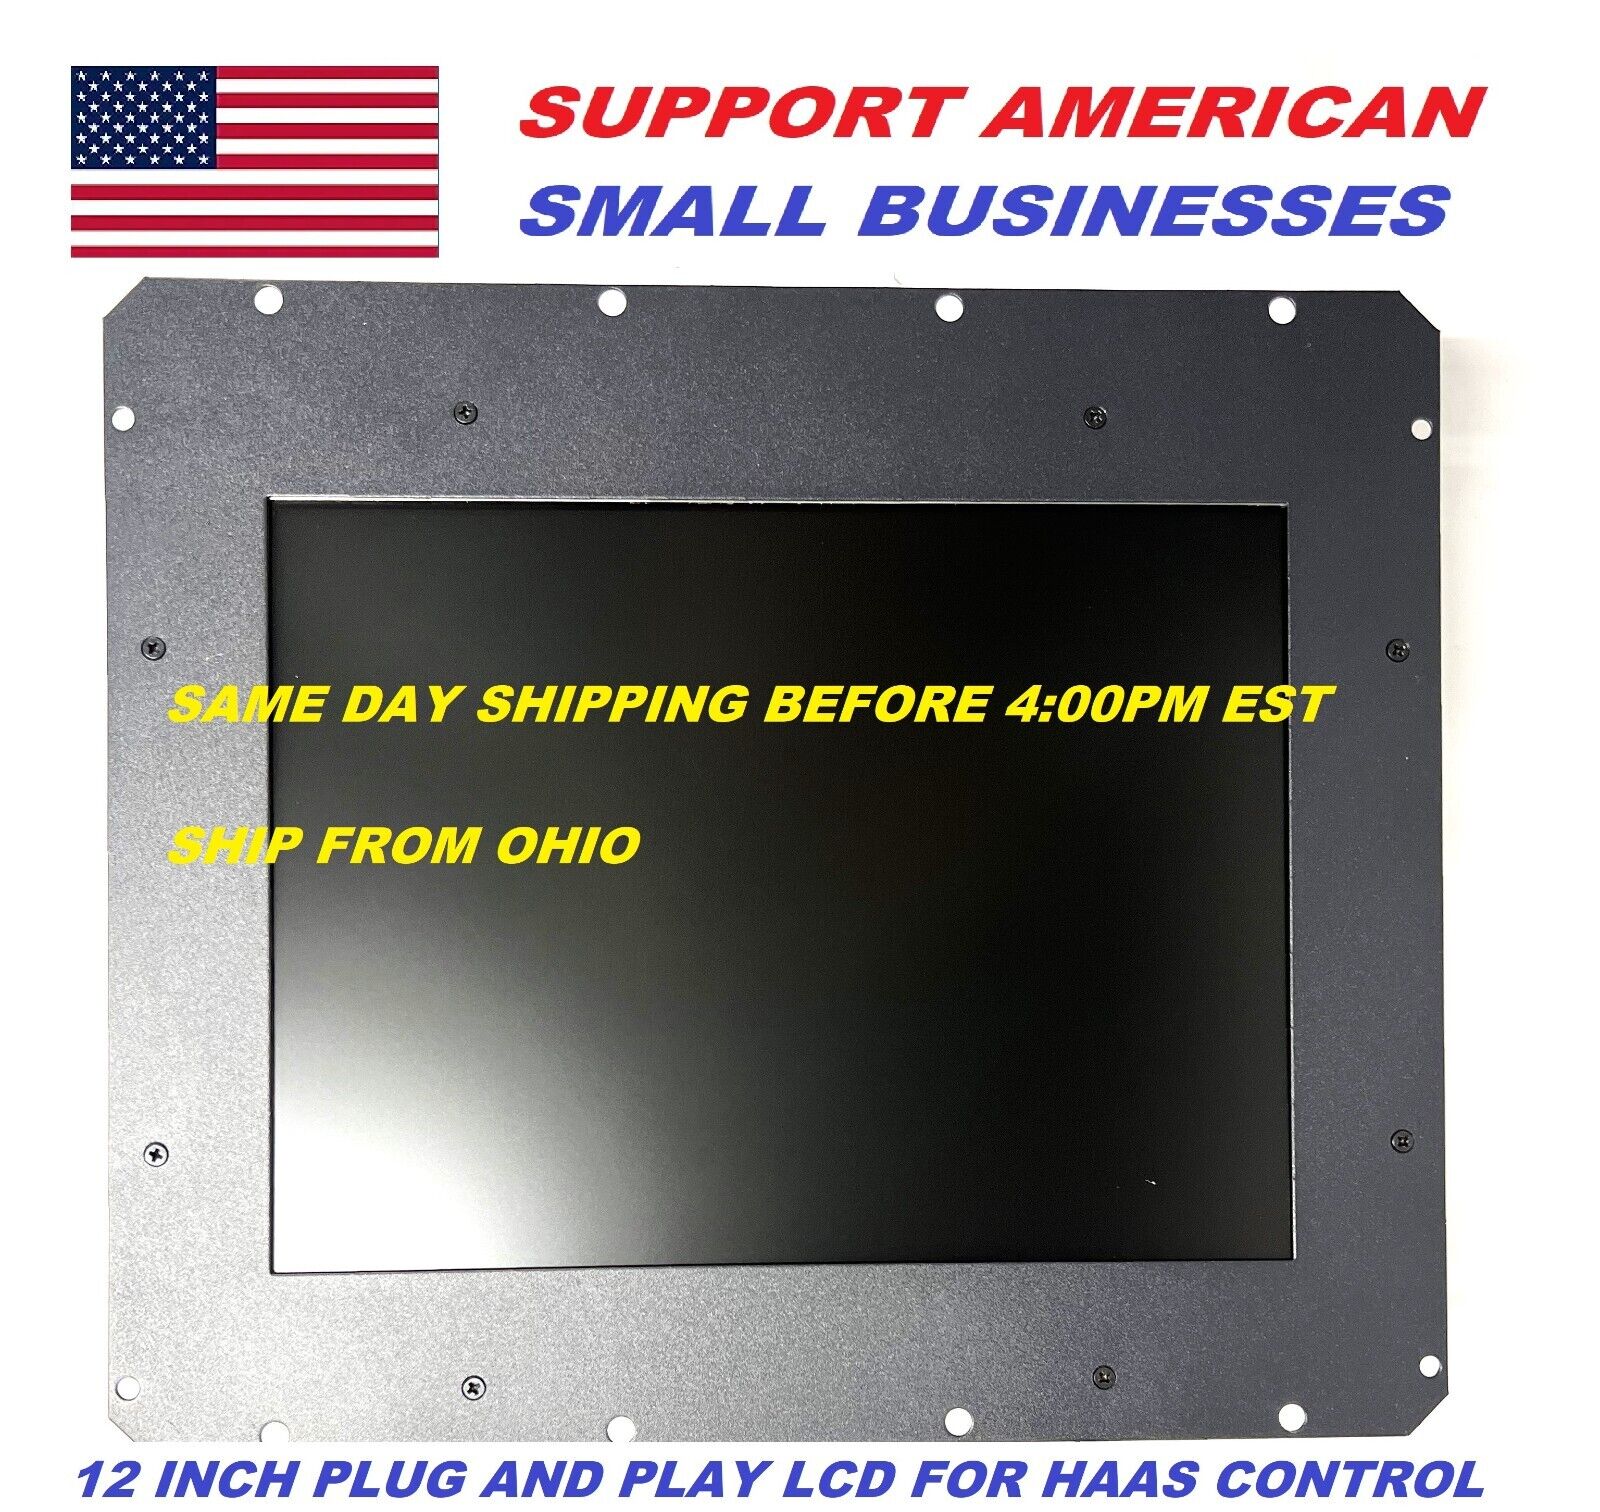 10.4 Inch LCD REPLACEMENT MONITOR FOR HAAS Mini Mill VF0 VF1 VF2 VF3 Up To 2003